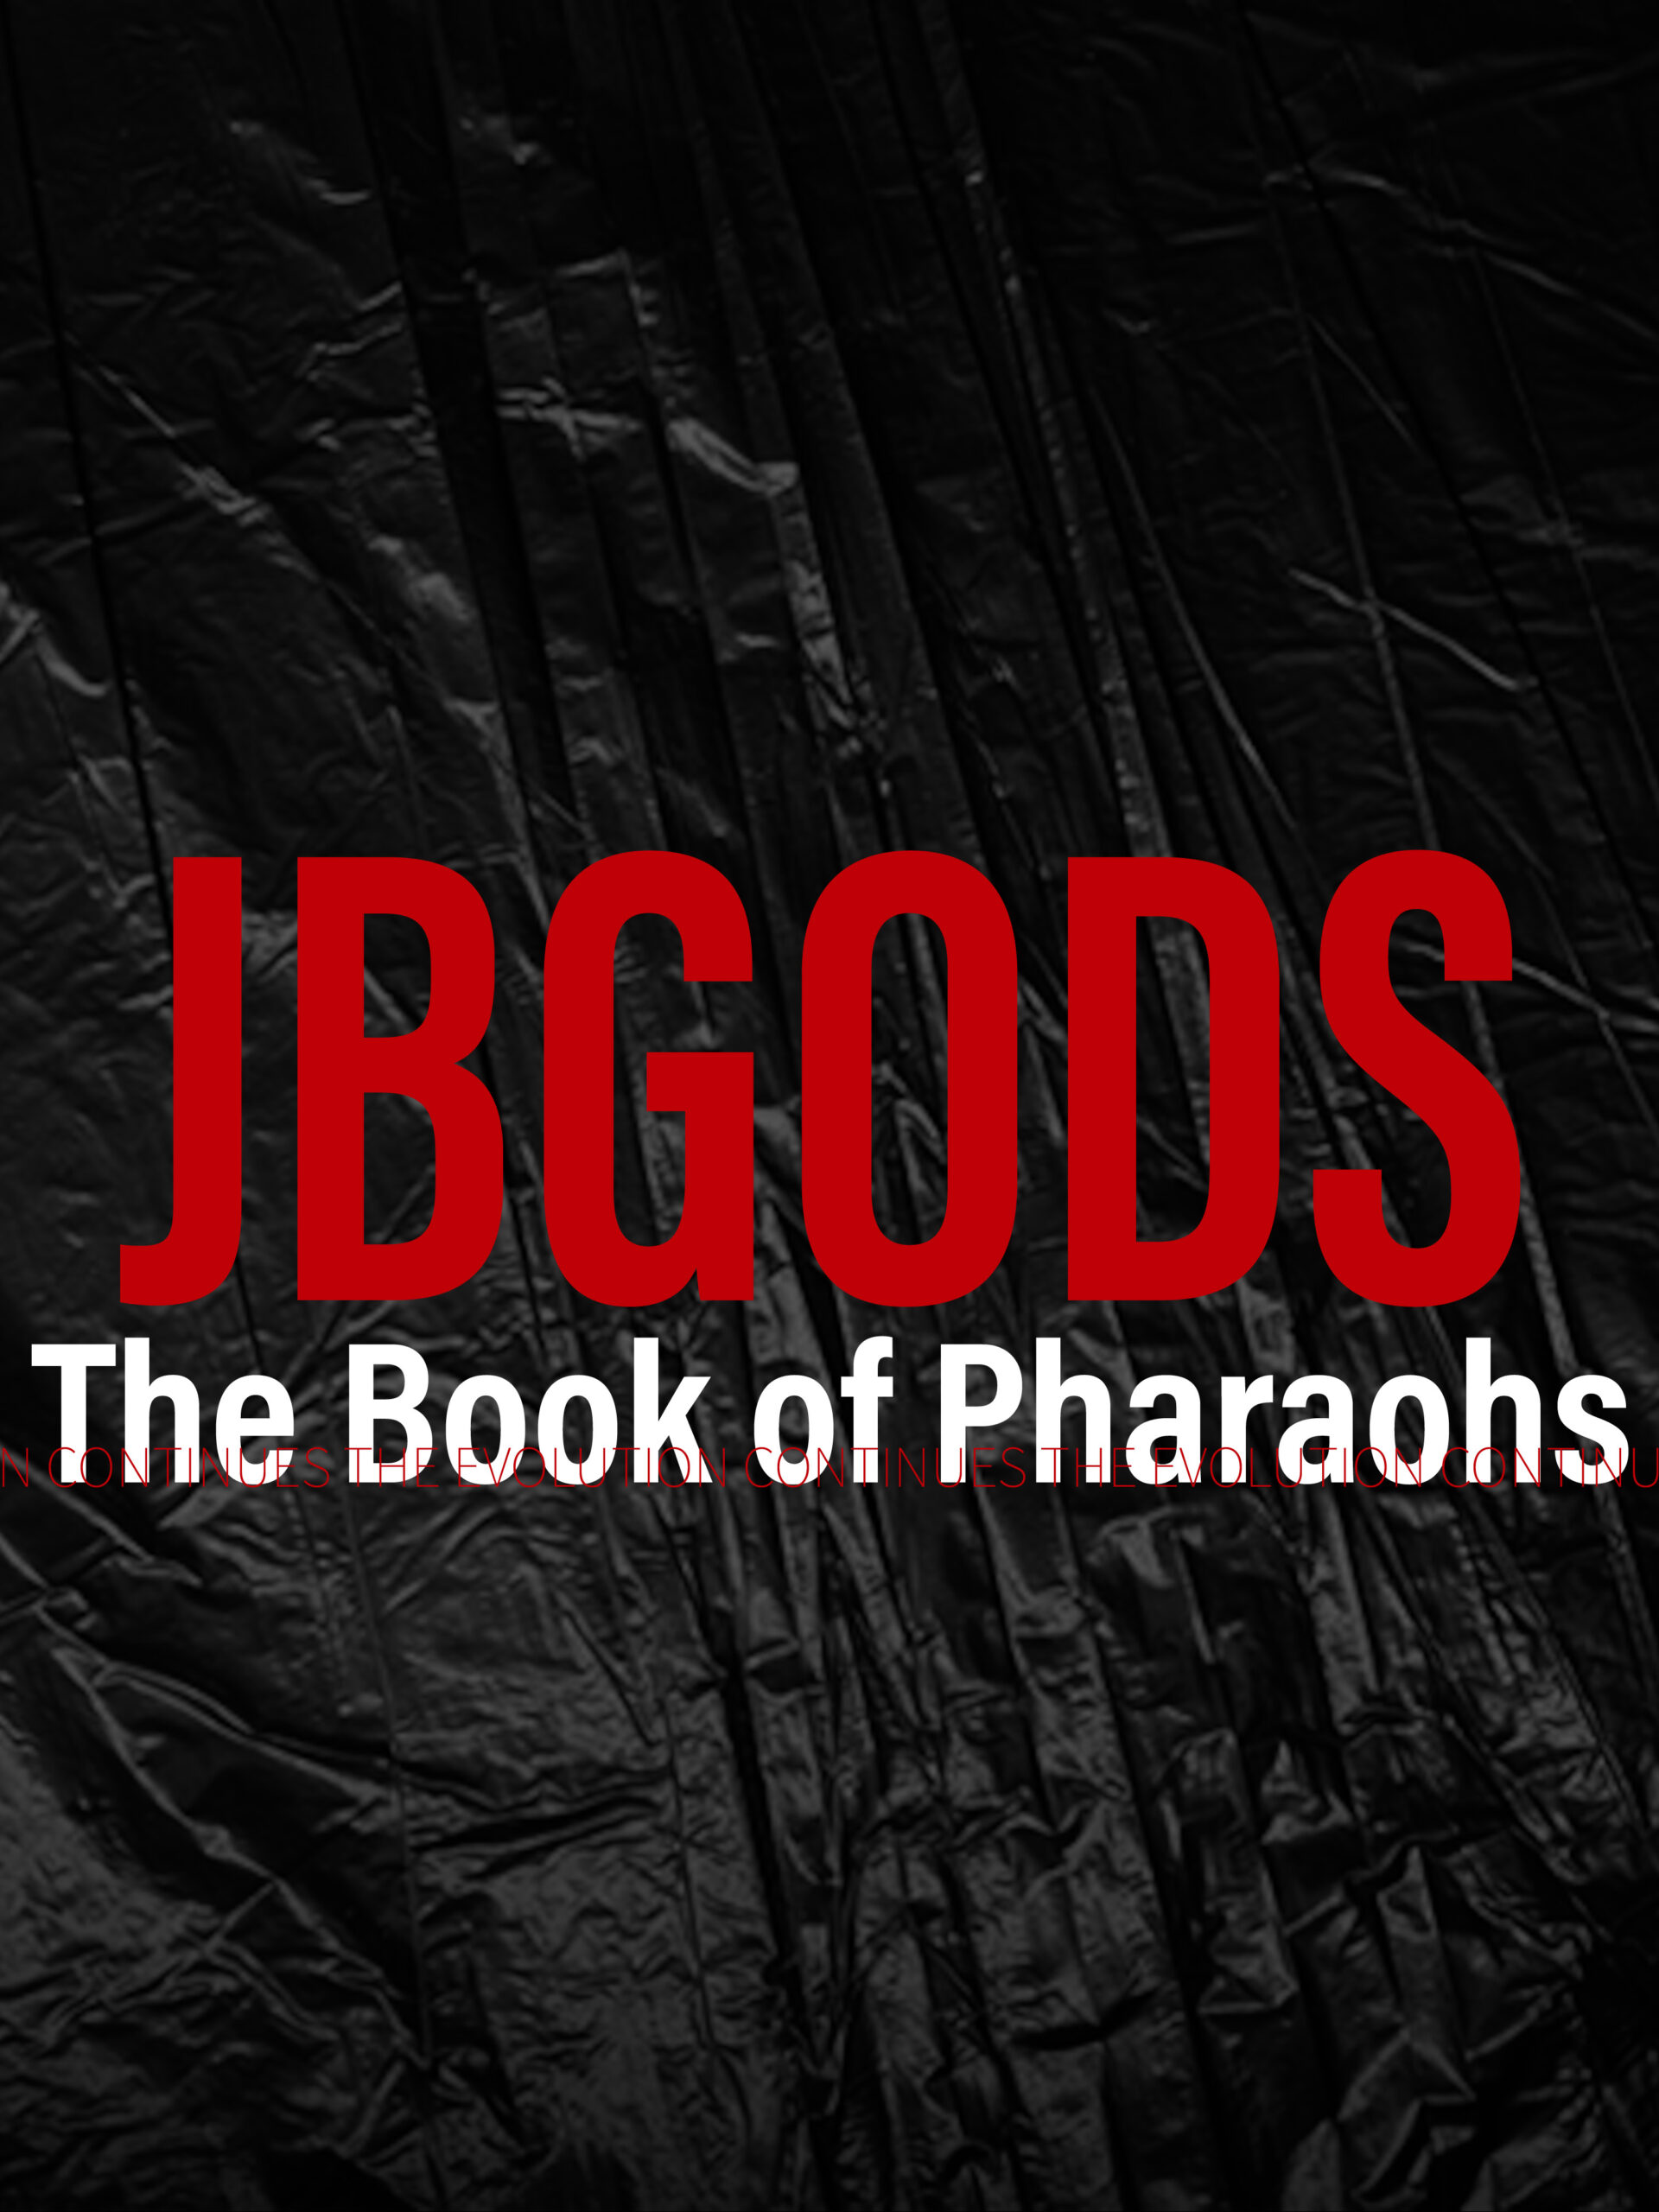 The Book of Pharaohs